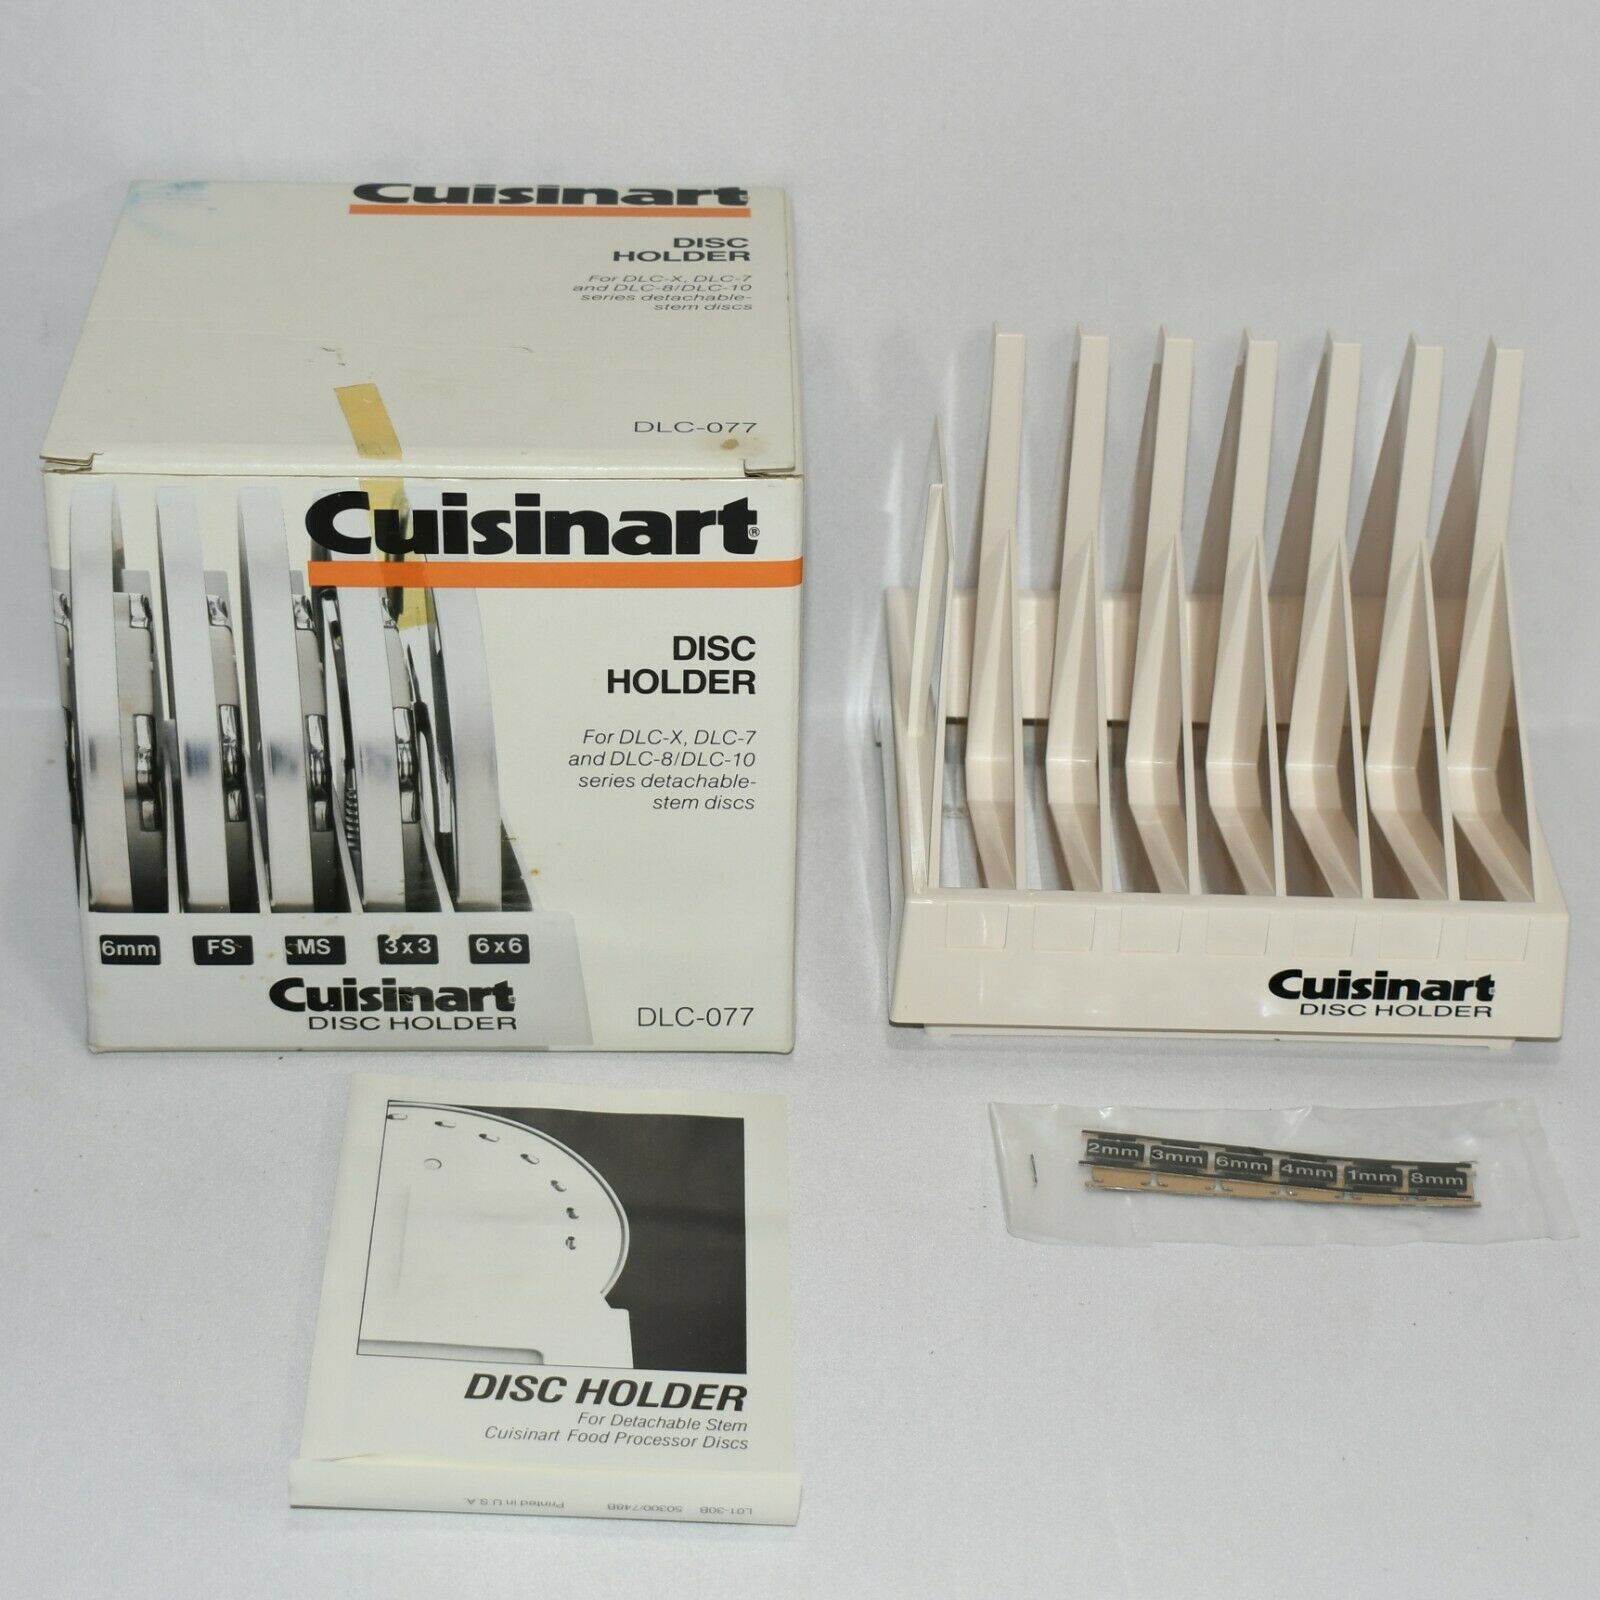 Cuisinart Food Processor Disc Holder DLC-077 With Disc ID Labels And Box USA!!! - $34.65